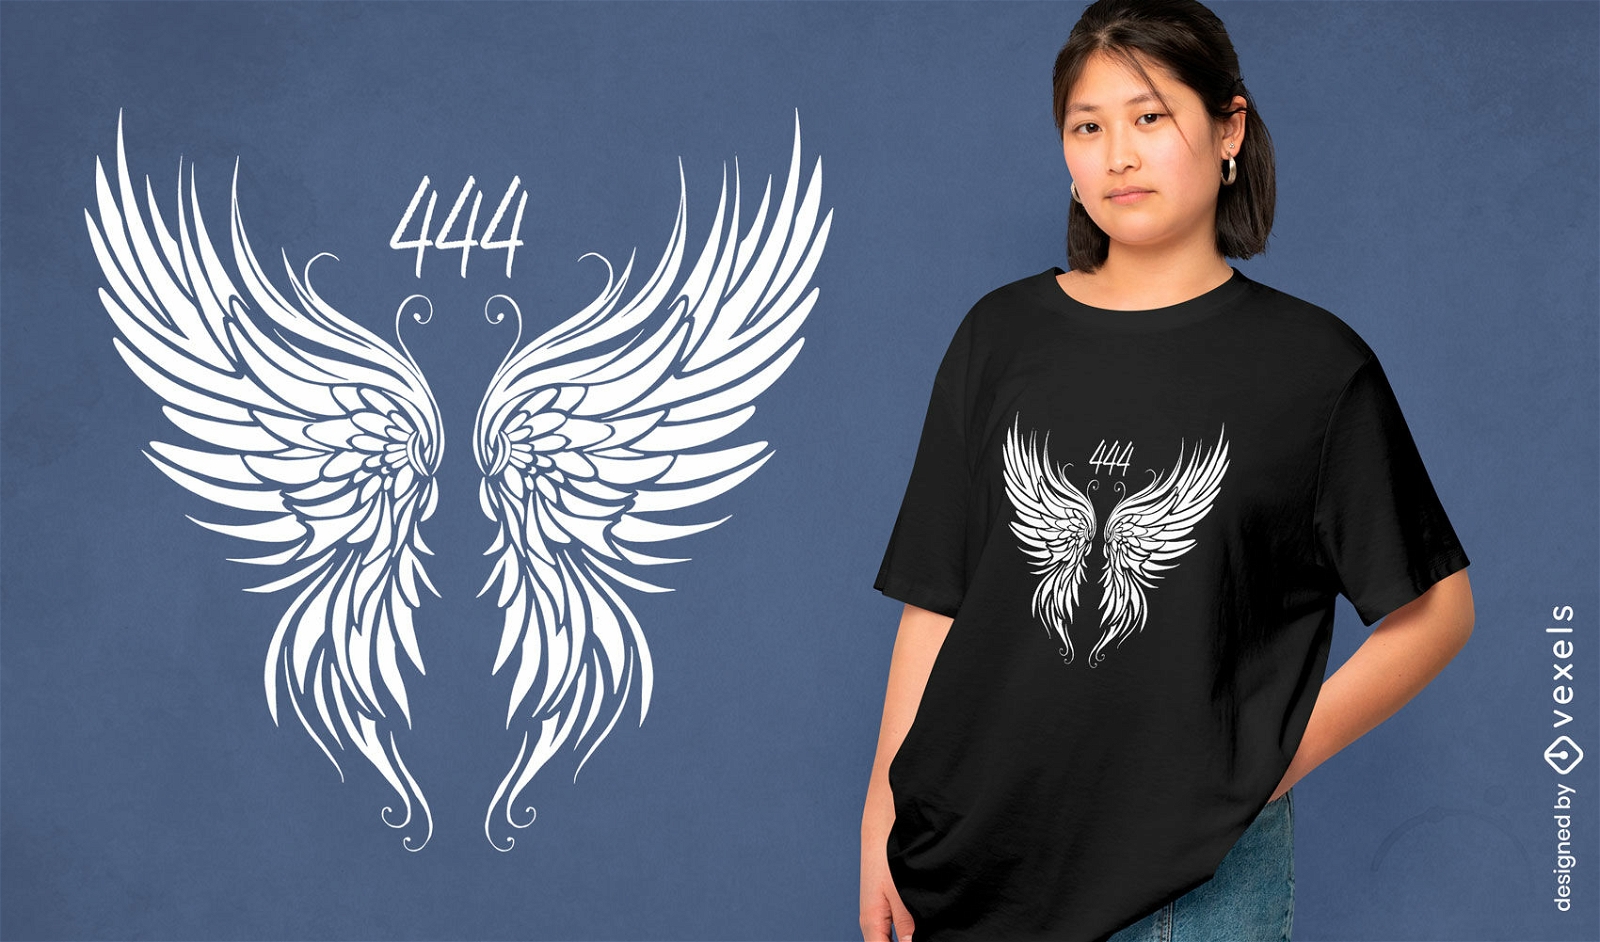 Angelic wings number t-shirt design